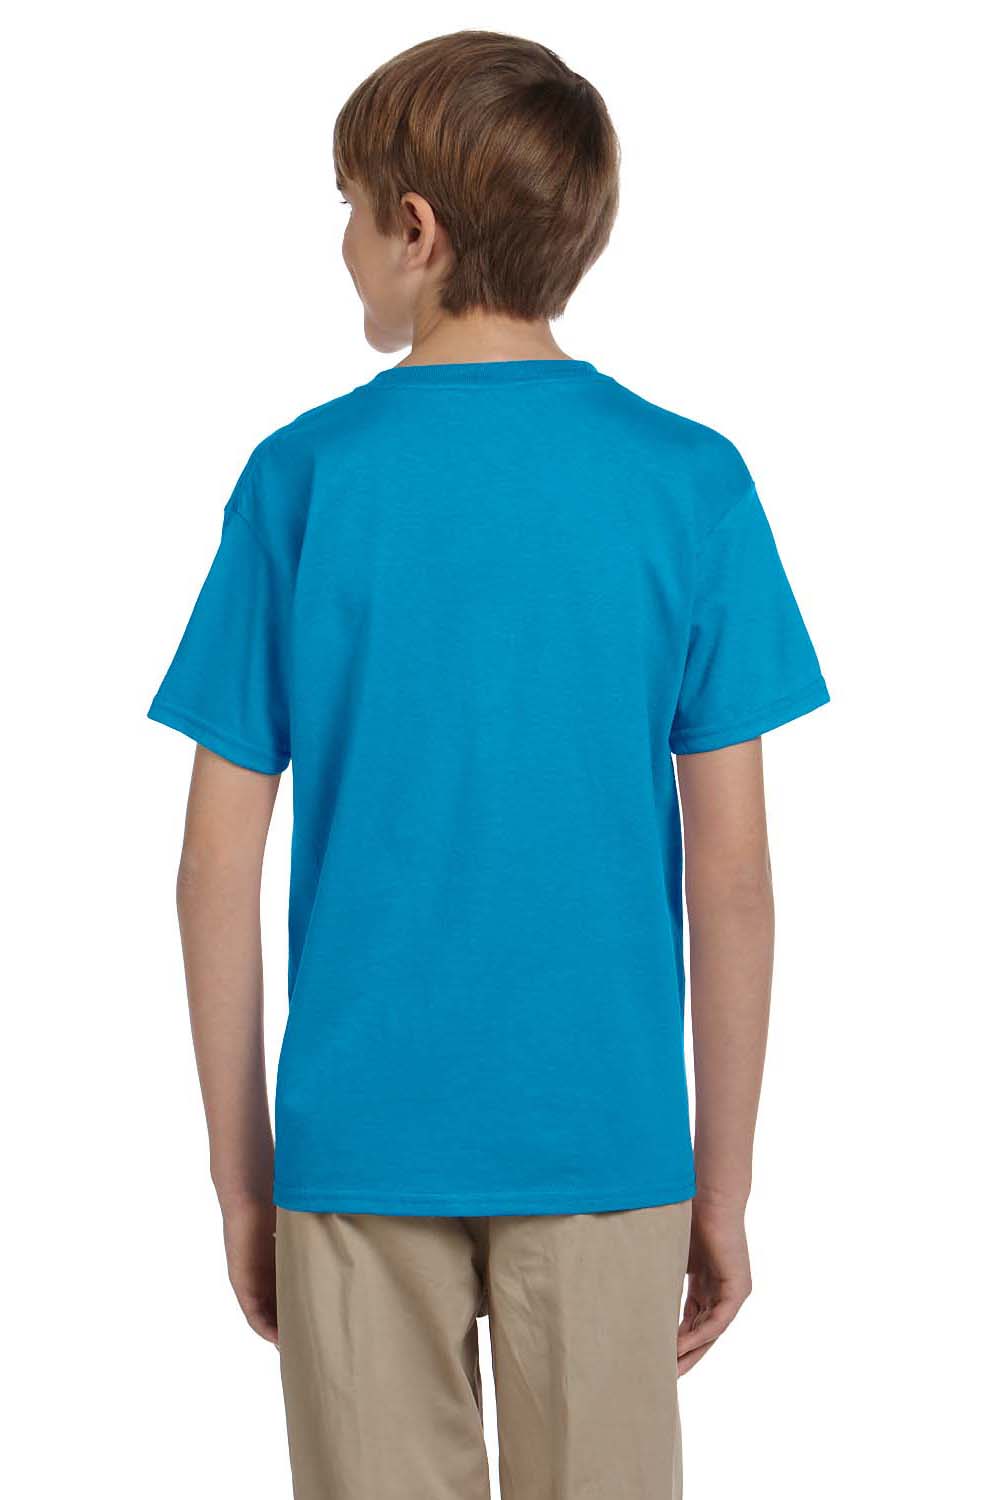 Fruit Of The Loom 3931B Youth HD Jersey Short Sleeve Crewneck T-Shirt Pacific Blue Back